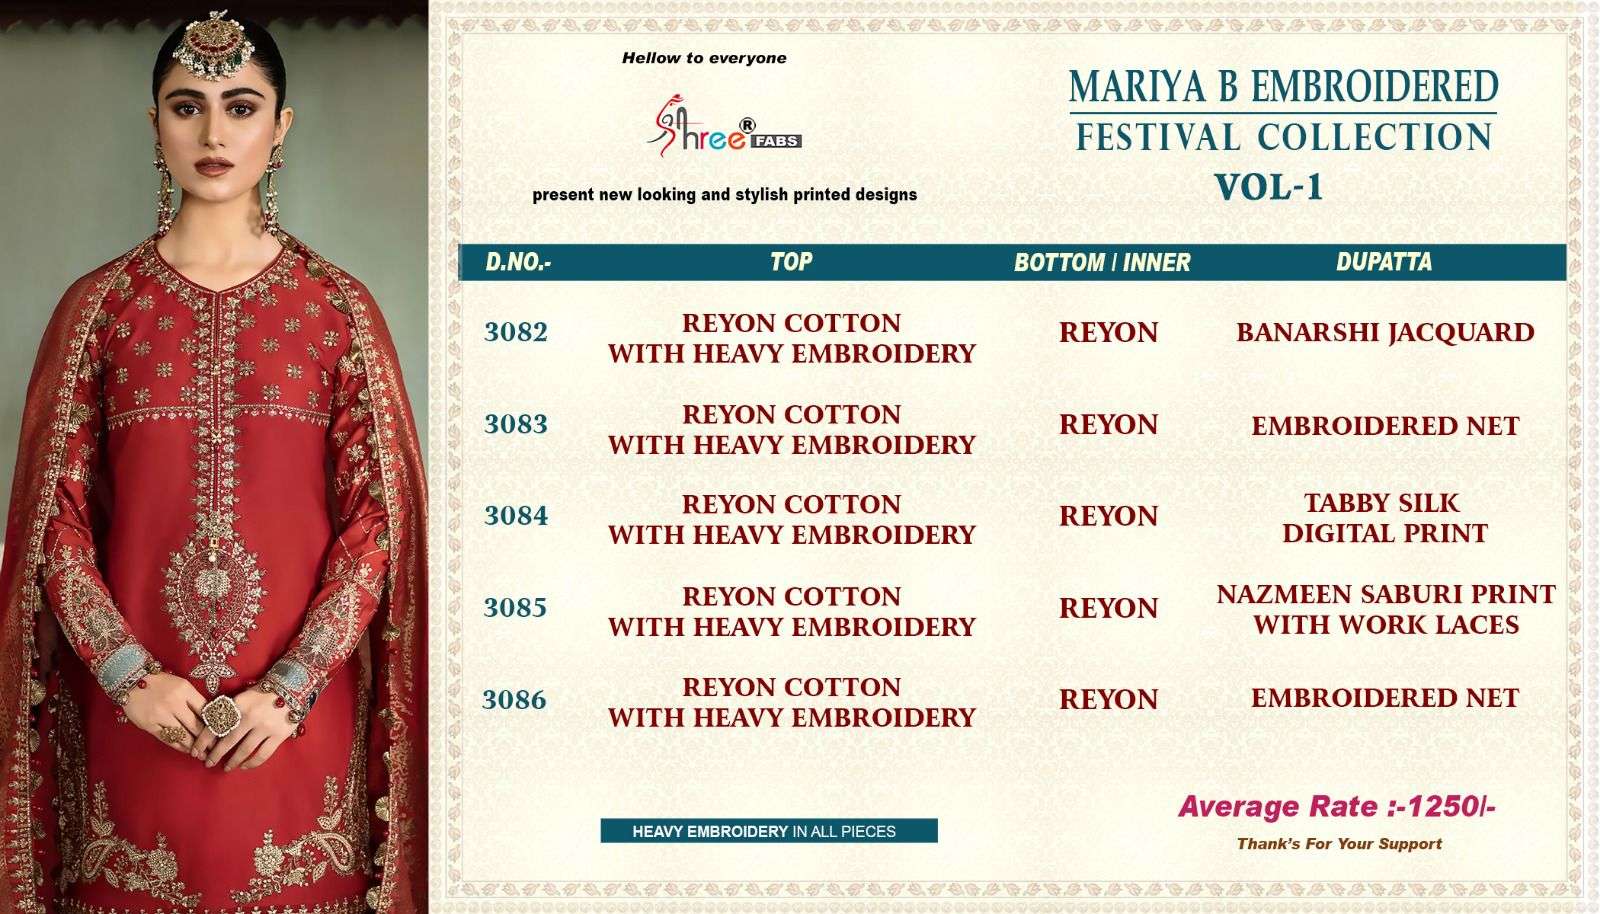 SHREE FABS MARIA B EMBROIDERED FESTIVAL COLLECTION VOL 1